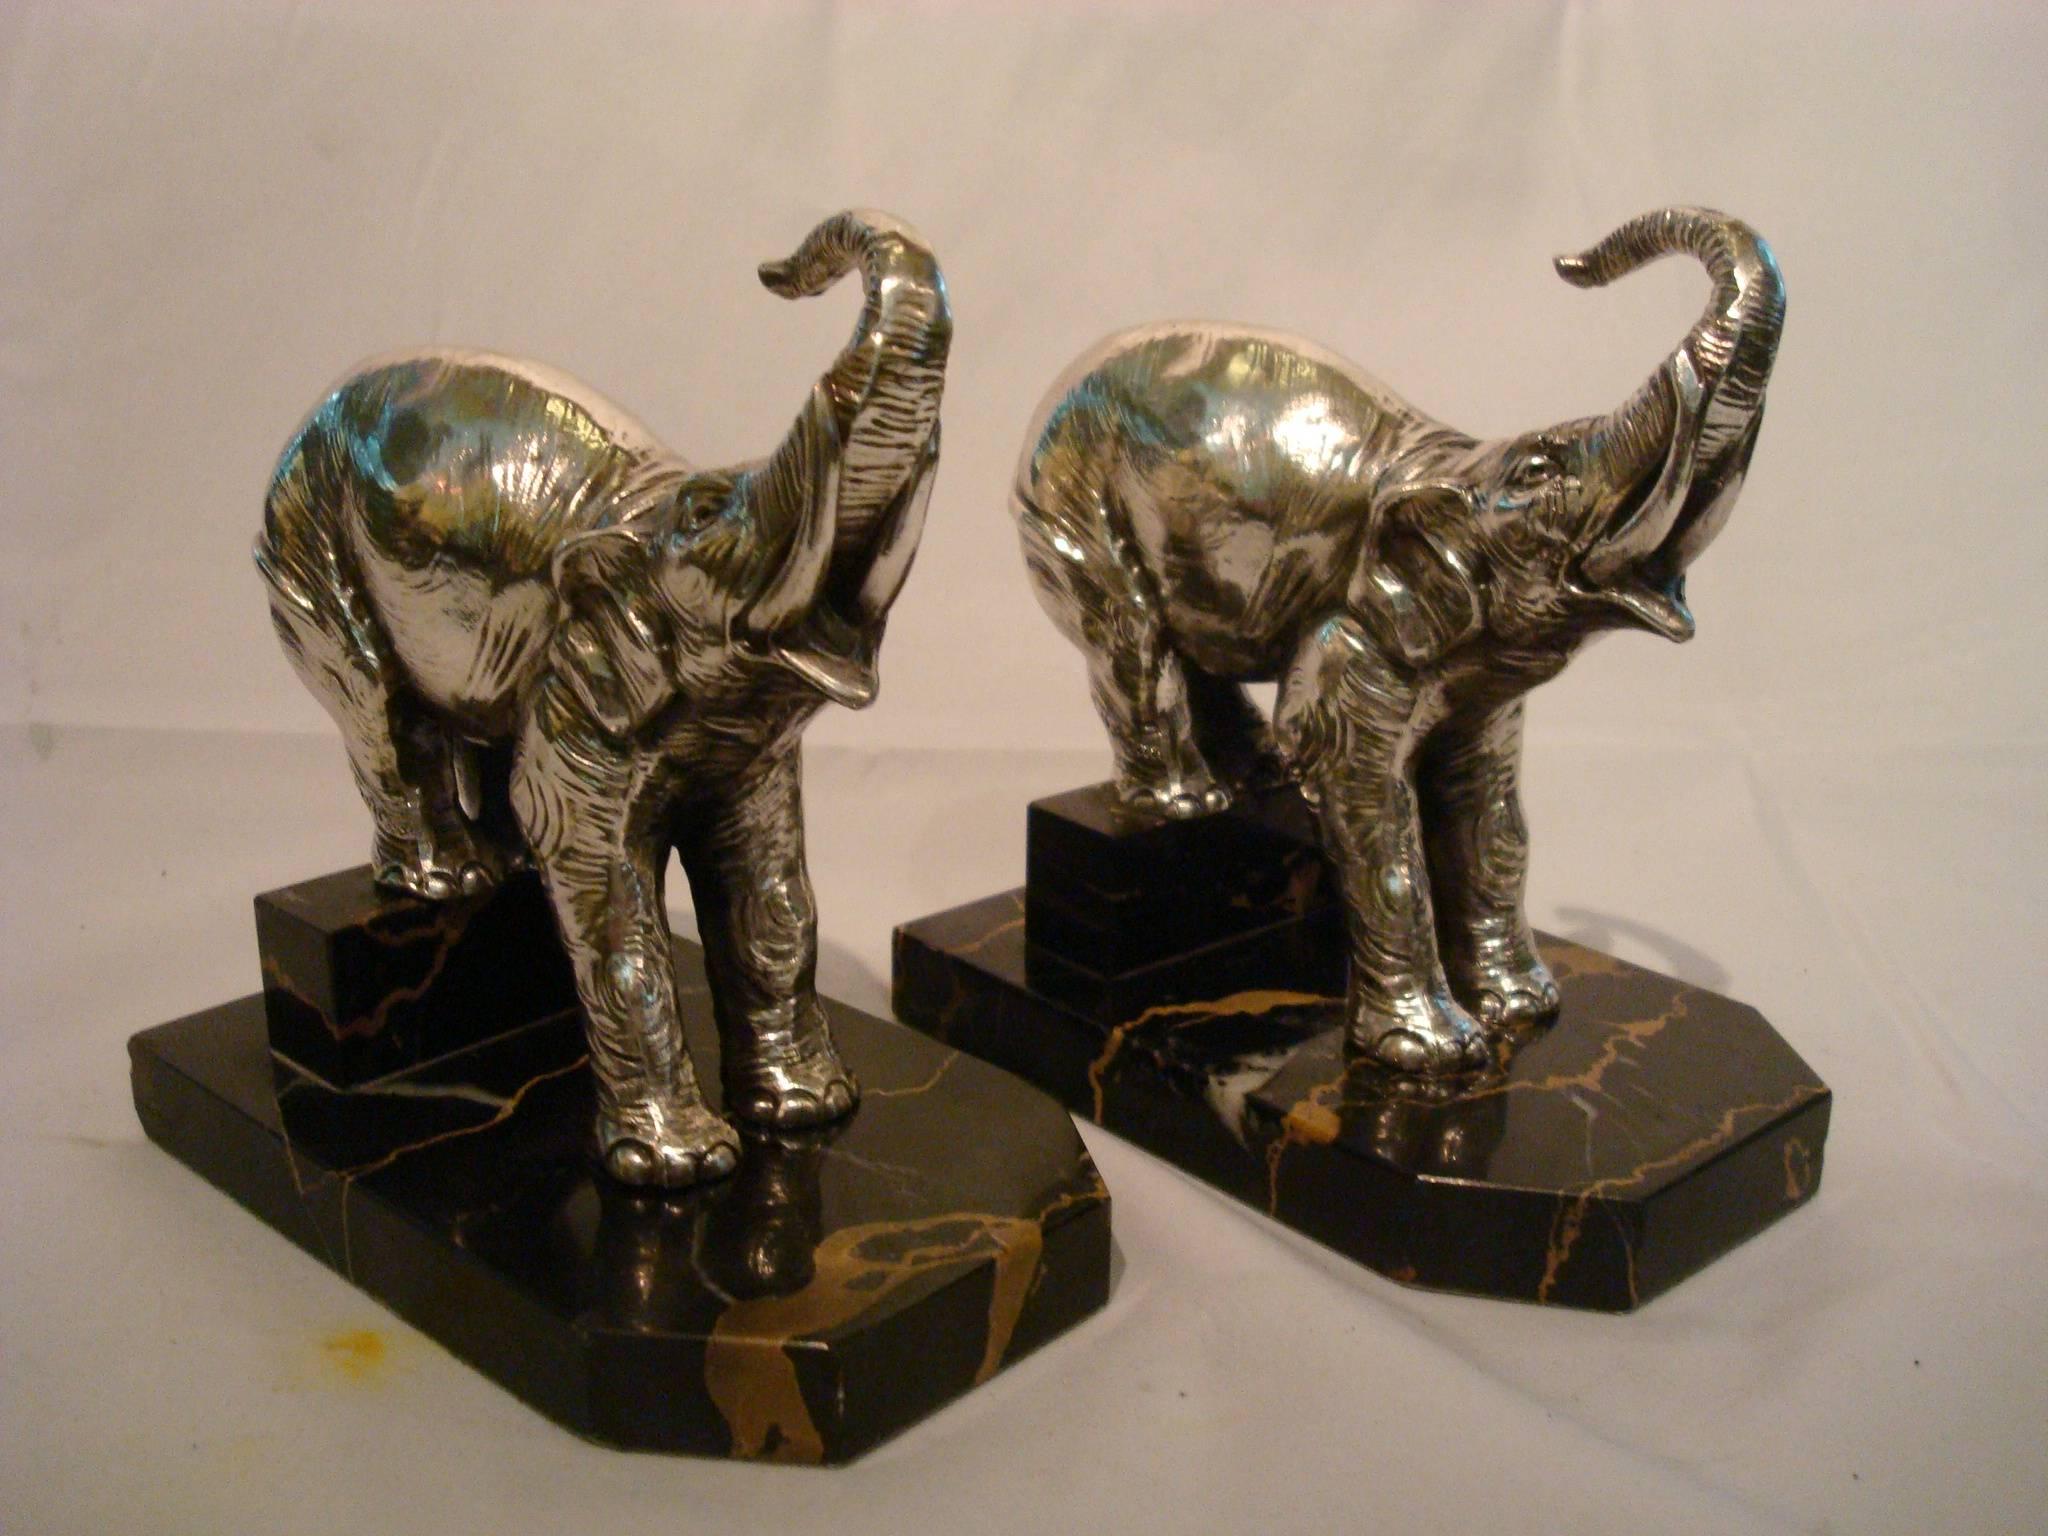 French Art Deco Elephants Bookends, France, 1920s